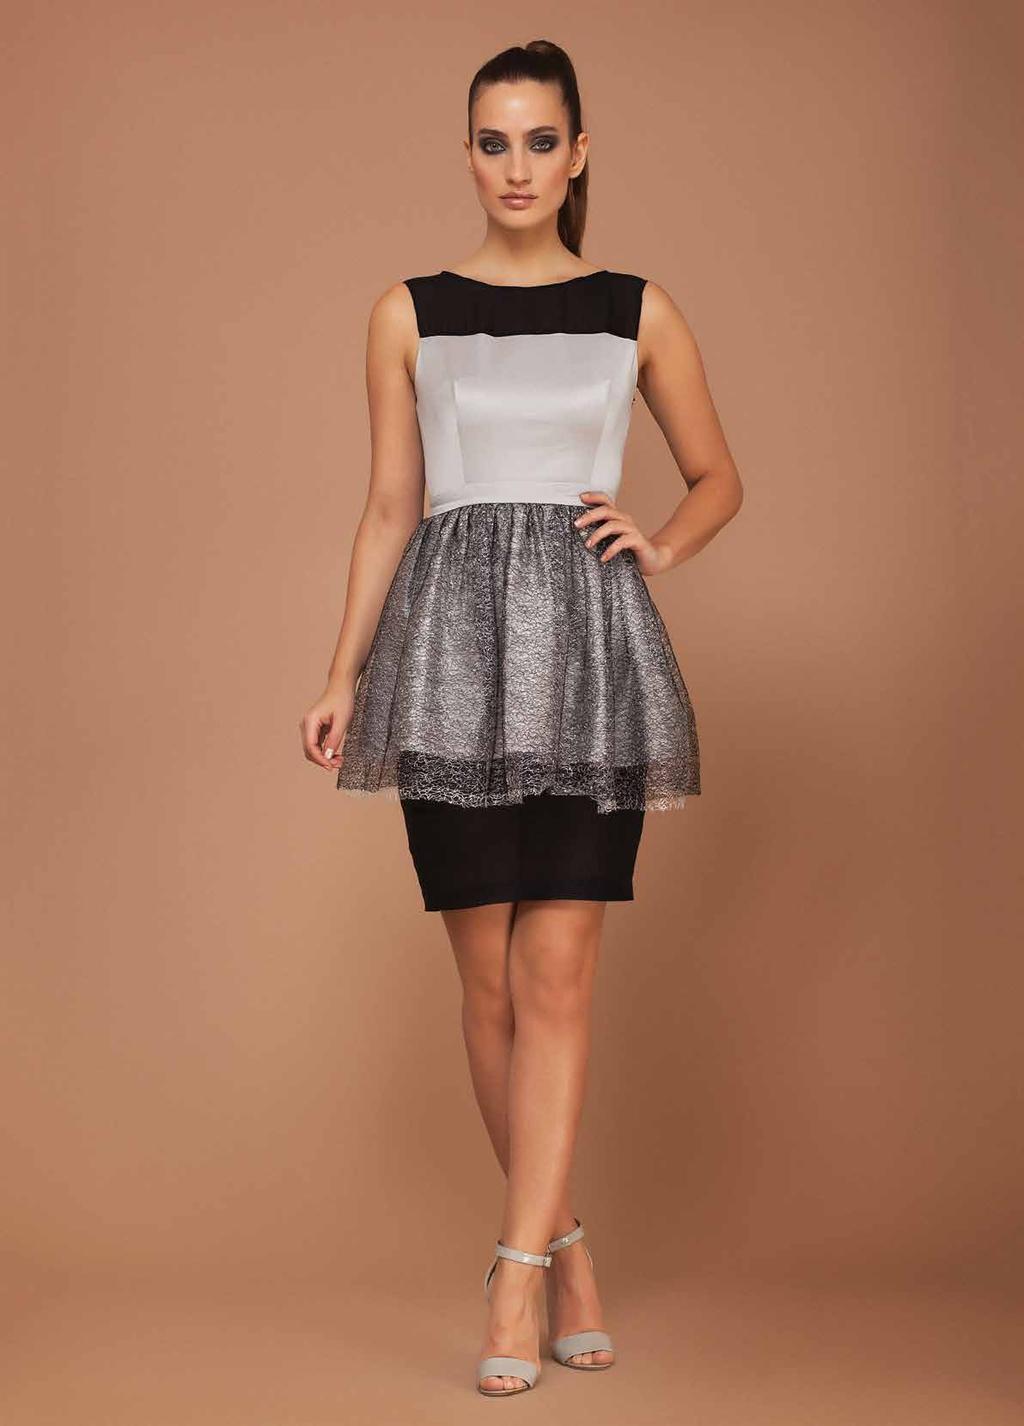 Italian cotton blend silver layered dress with black and silver textured